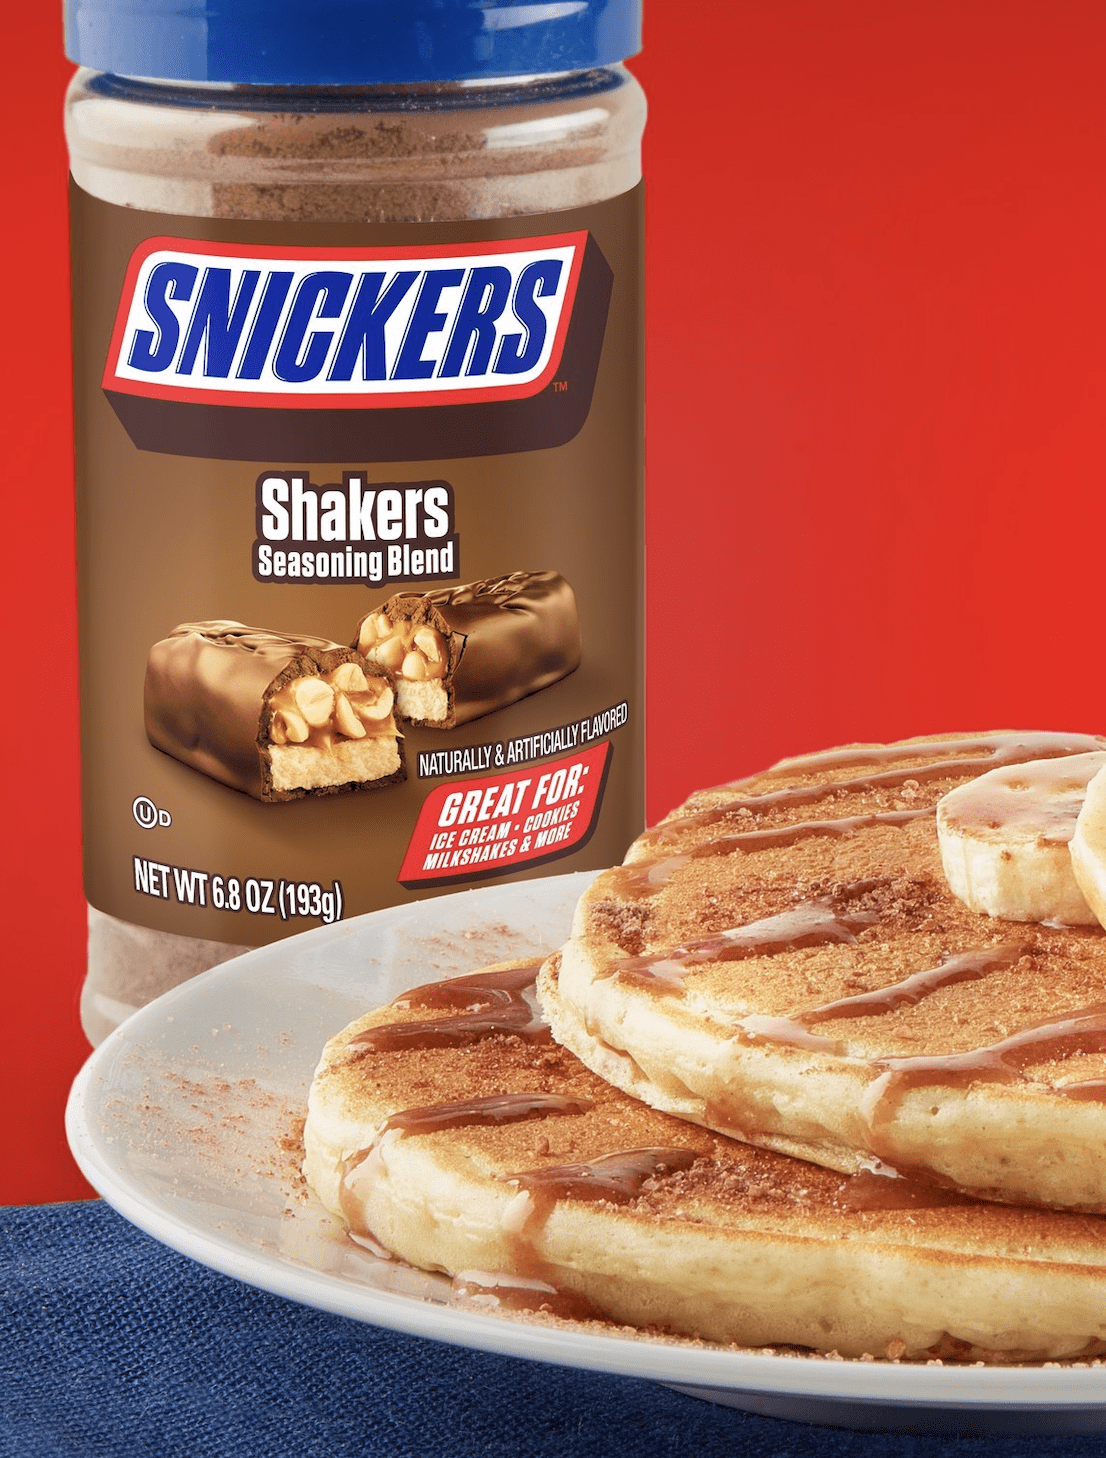 Snack Betch on Instagram: New Snickers Shakers Seasoning Blend! Headed to  shelves this month. Joining the existing Twix Shakers & Cinnadust.